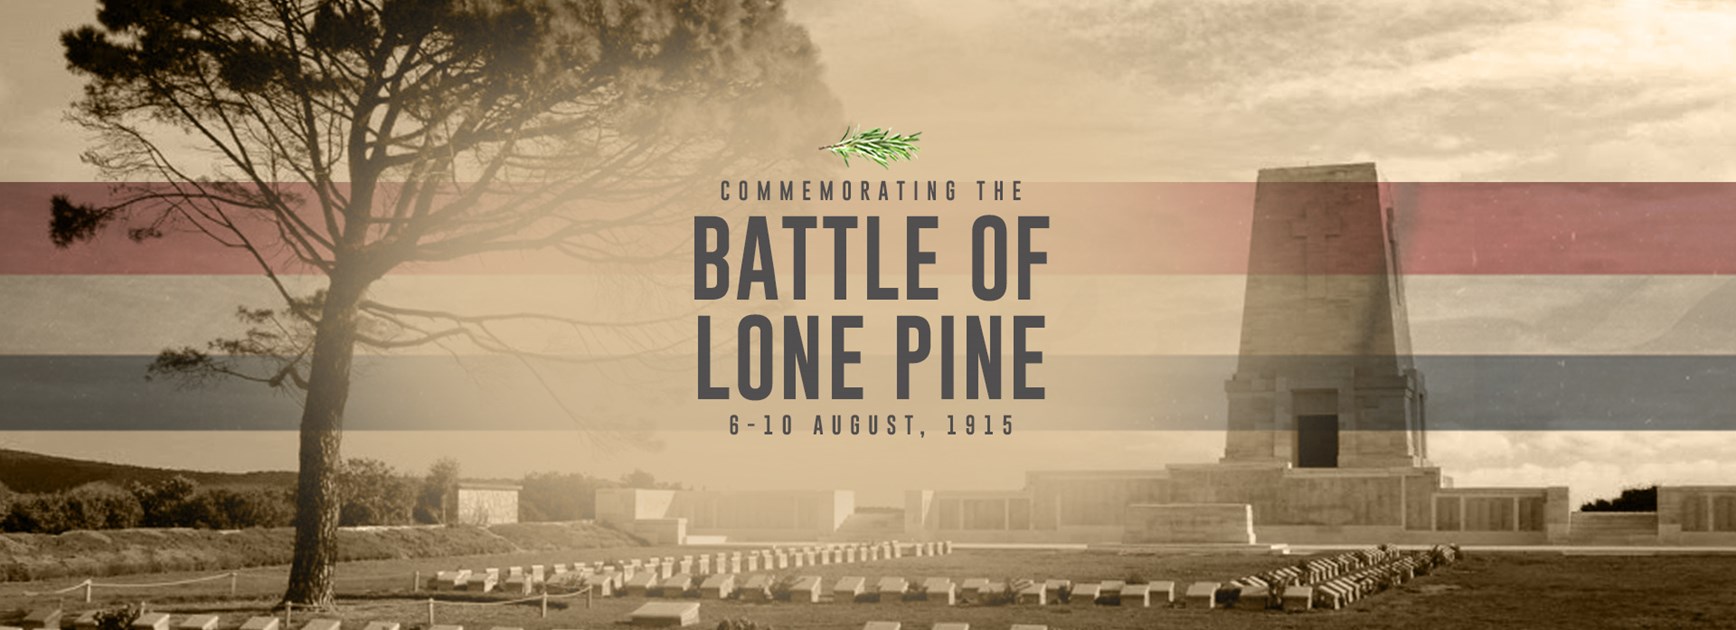 Commemorating the Battle of Lone Pine